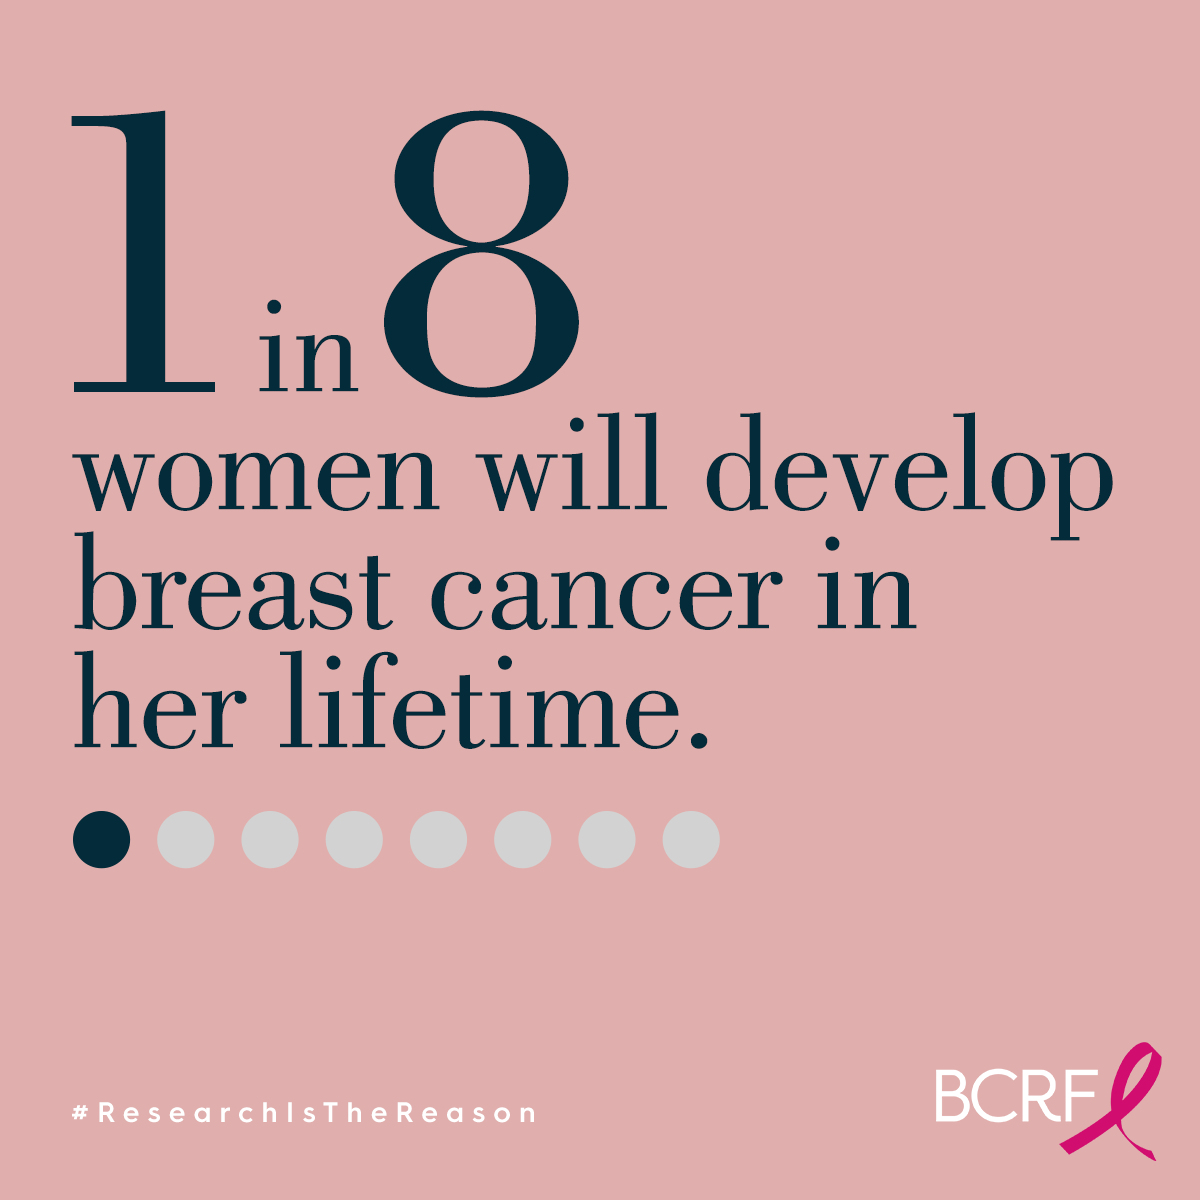 1 in 8 women will develop breast cancer in her lifetime